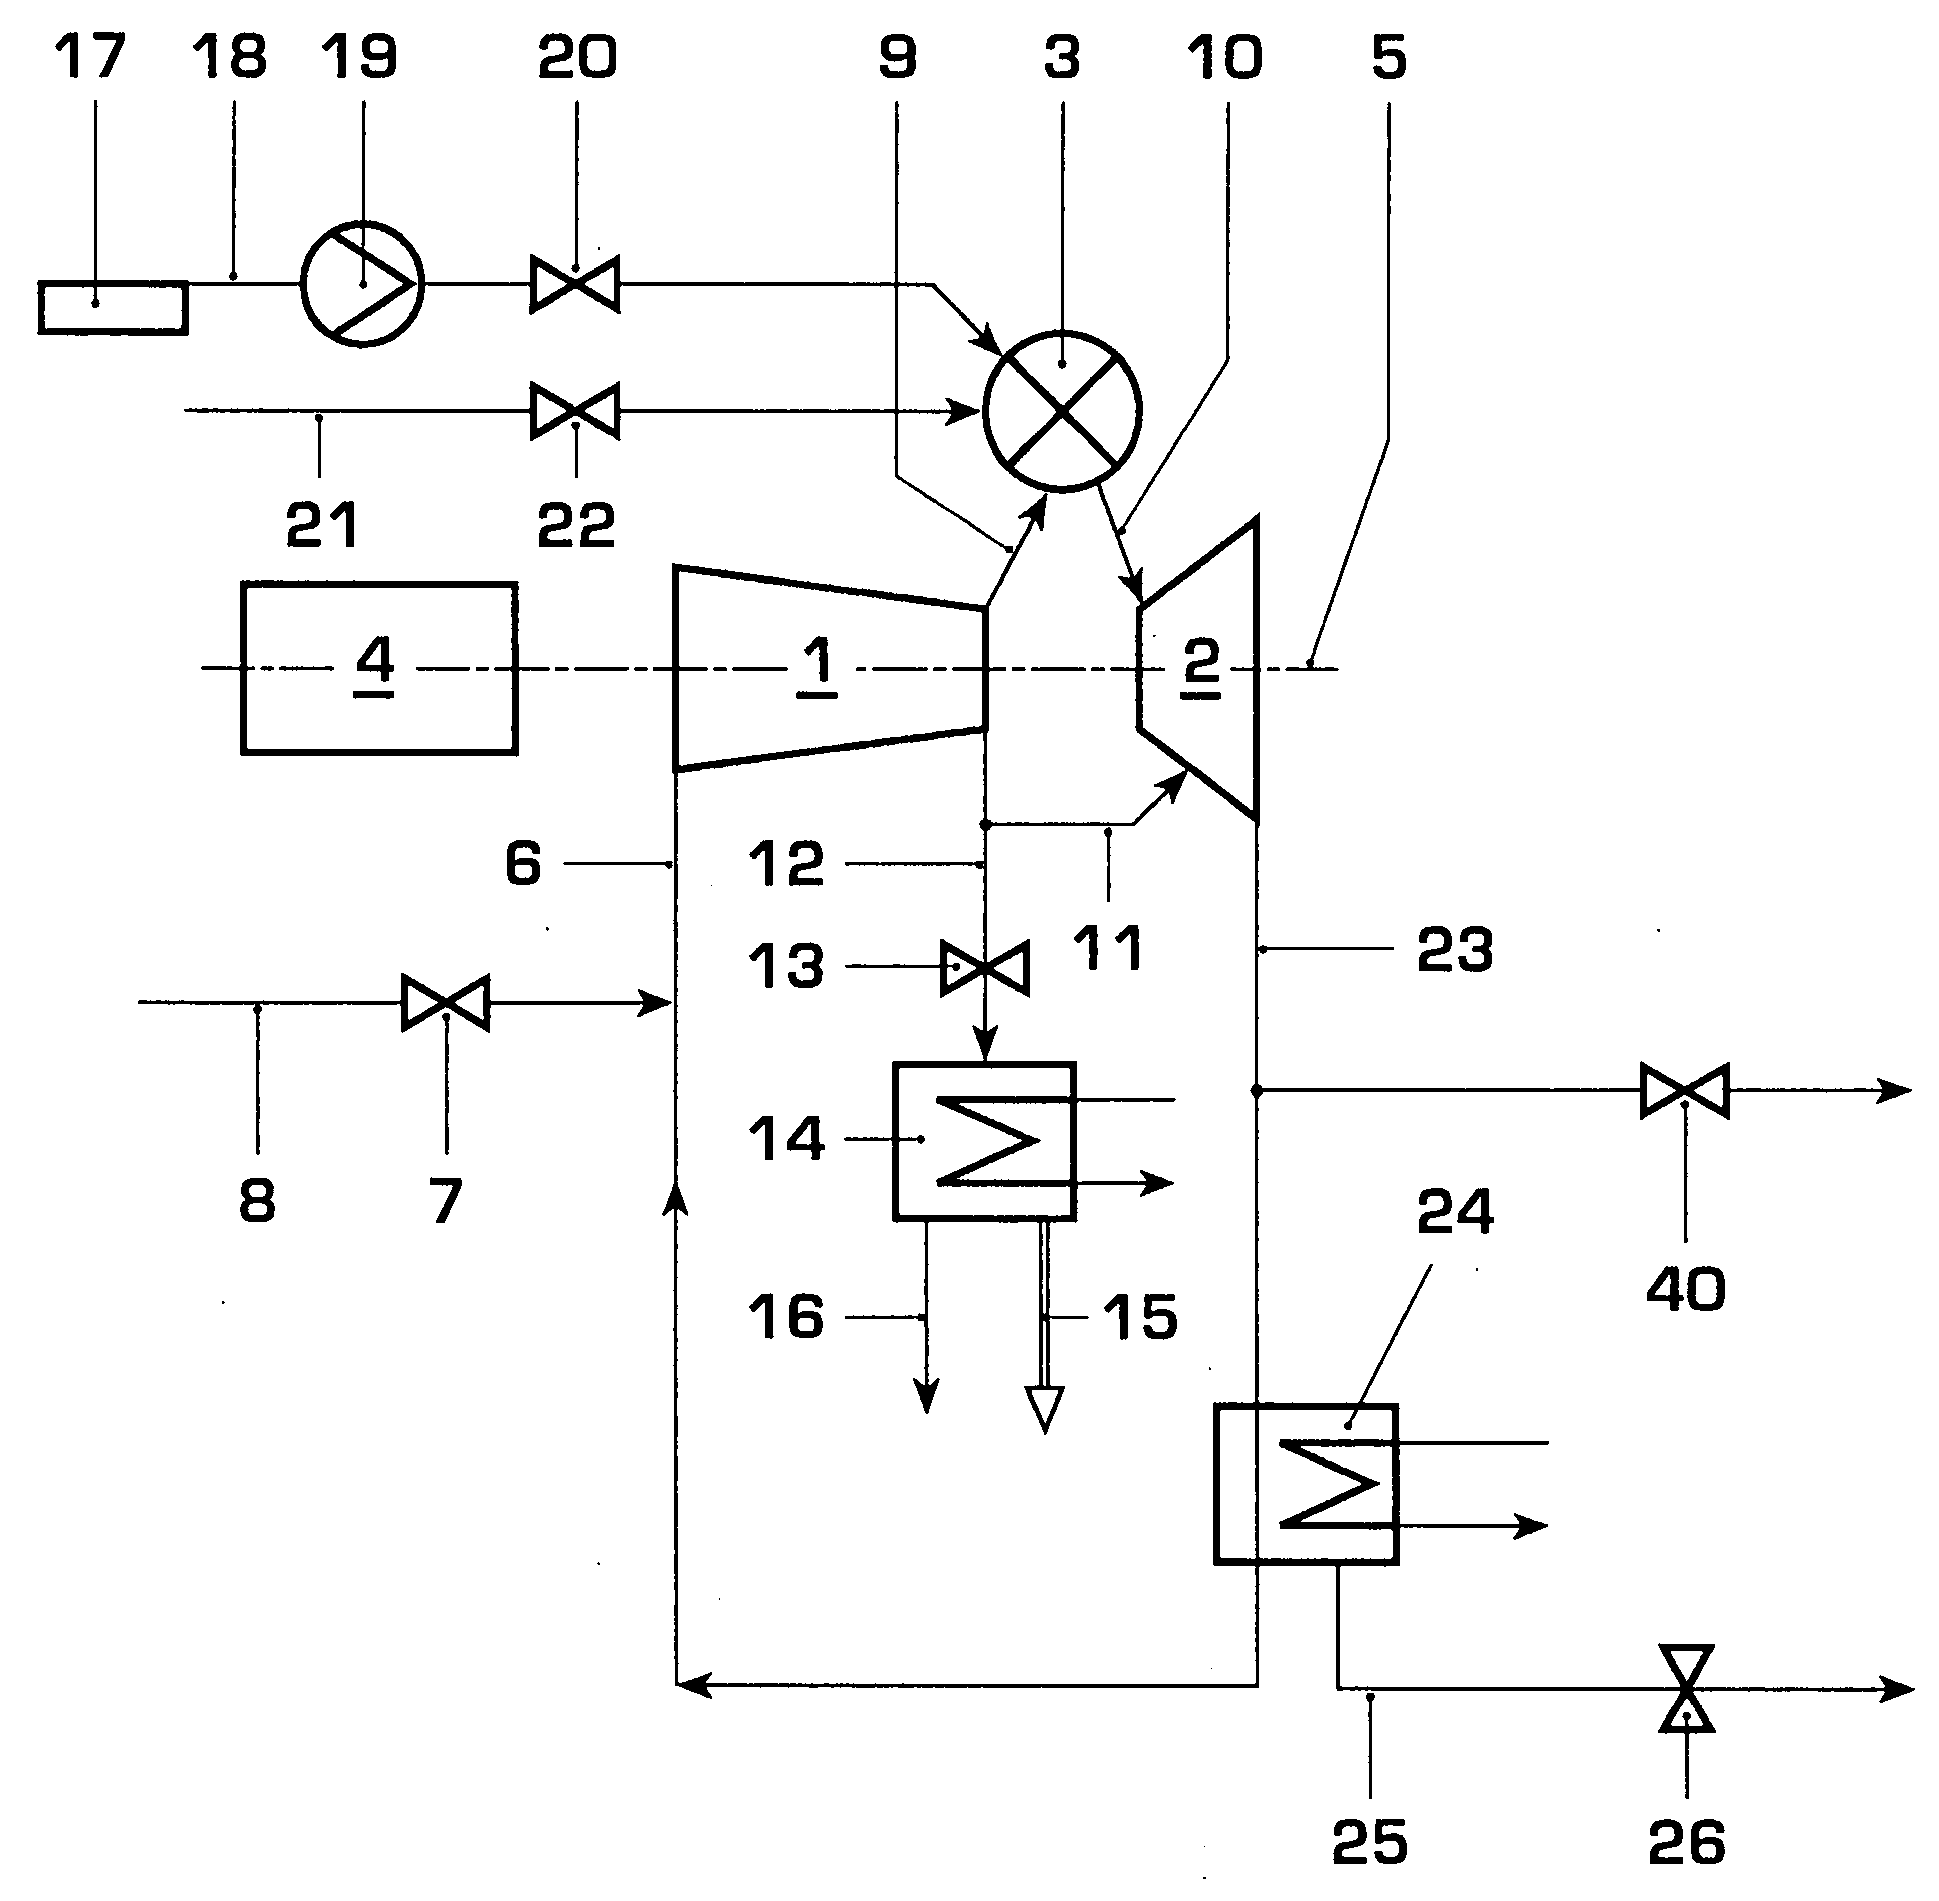 Method for operating a power plant by means of a CO2 process